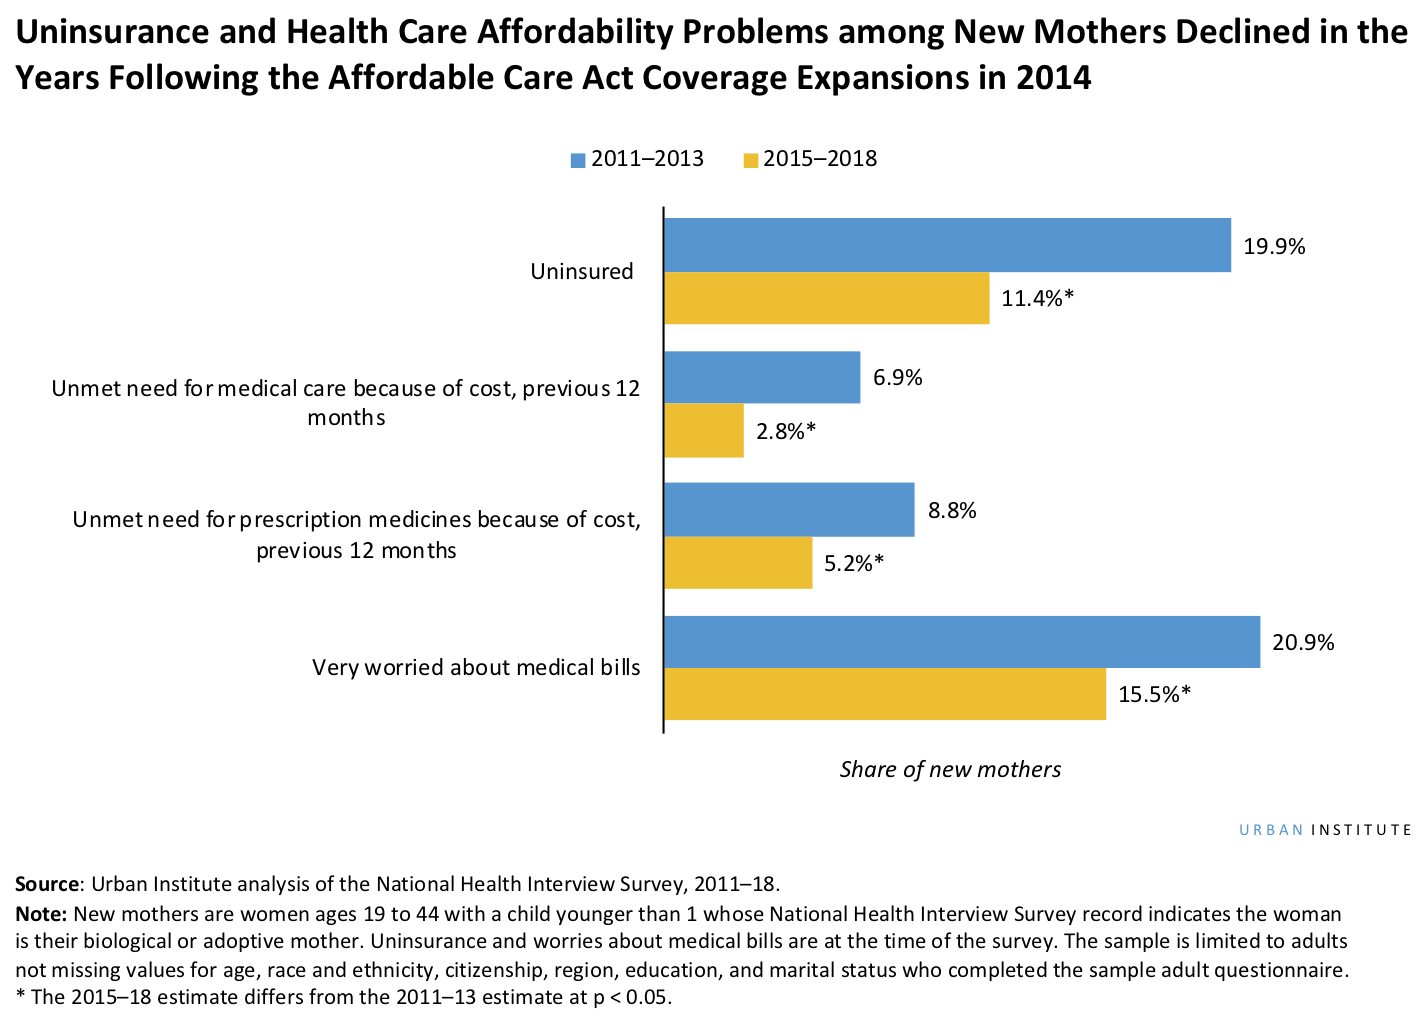 Bar chart showing uninsurance and health care affordability problems among new moms declined after the Affordable Care Act coverage expansions in 2014